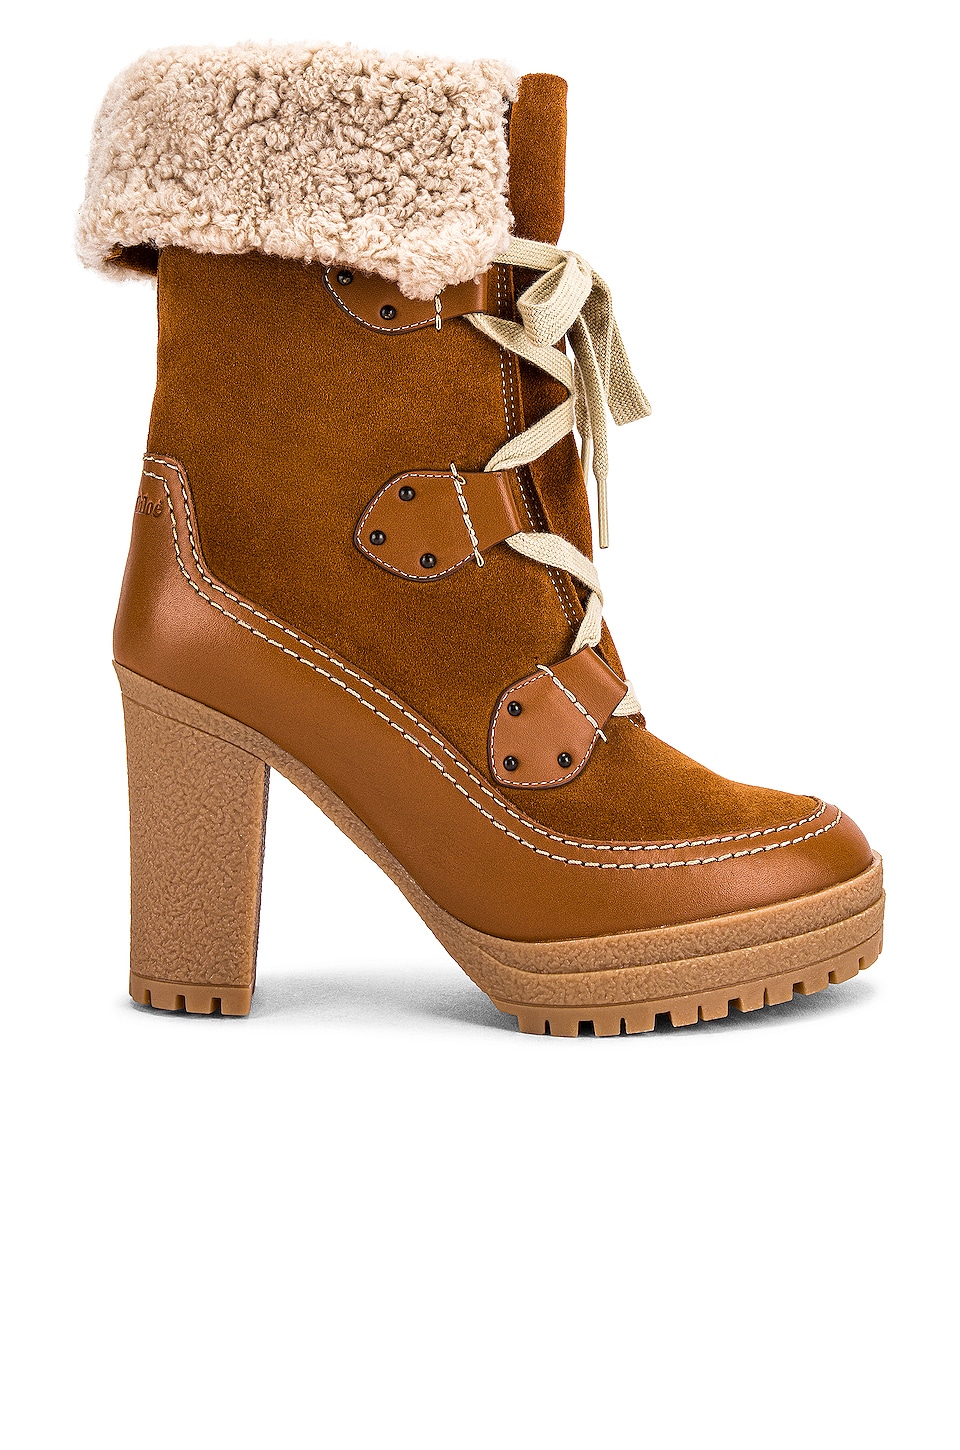 See By Chloe Verena Shearling Lined Boot in Tan